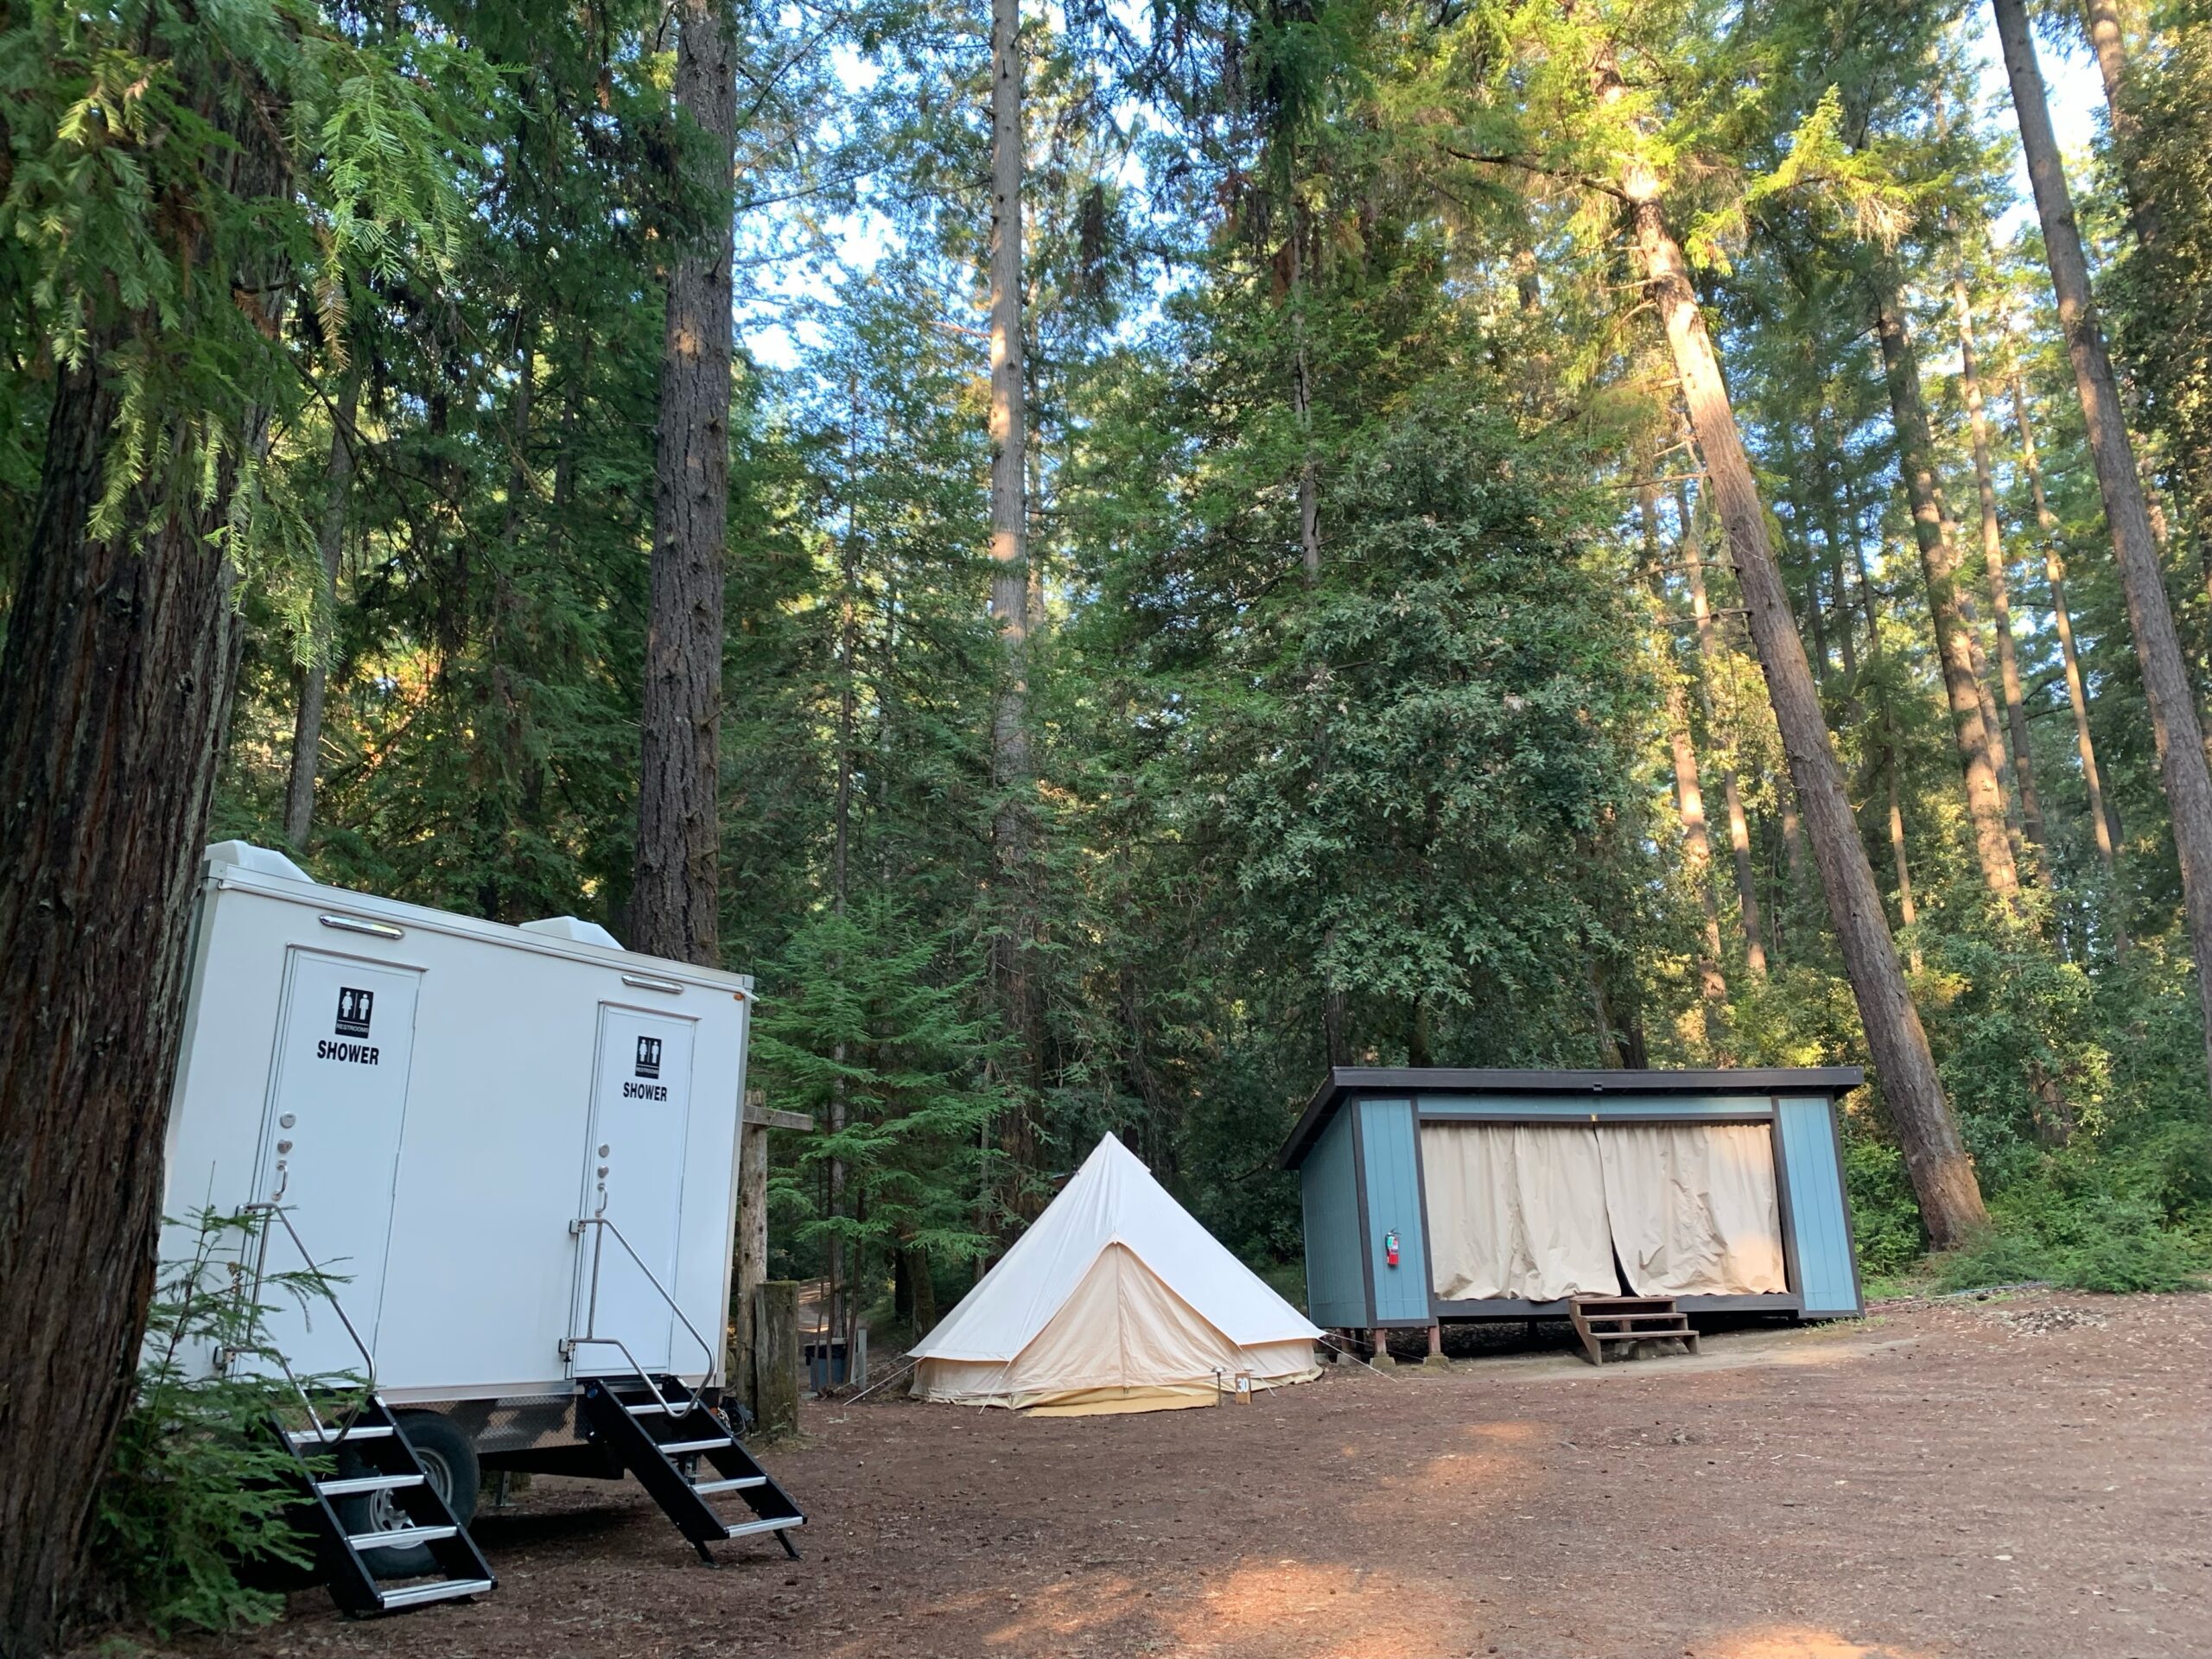 Glamping Shower Rentals in California - The Lavatory Nor Cal